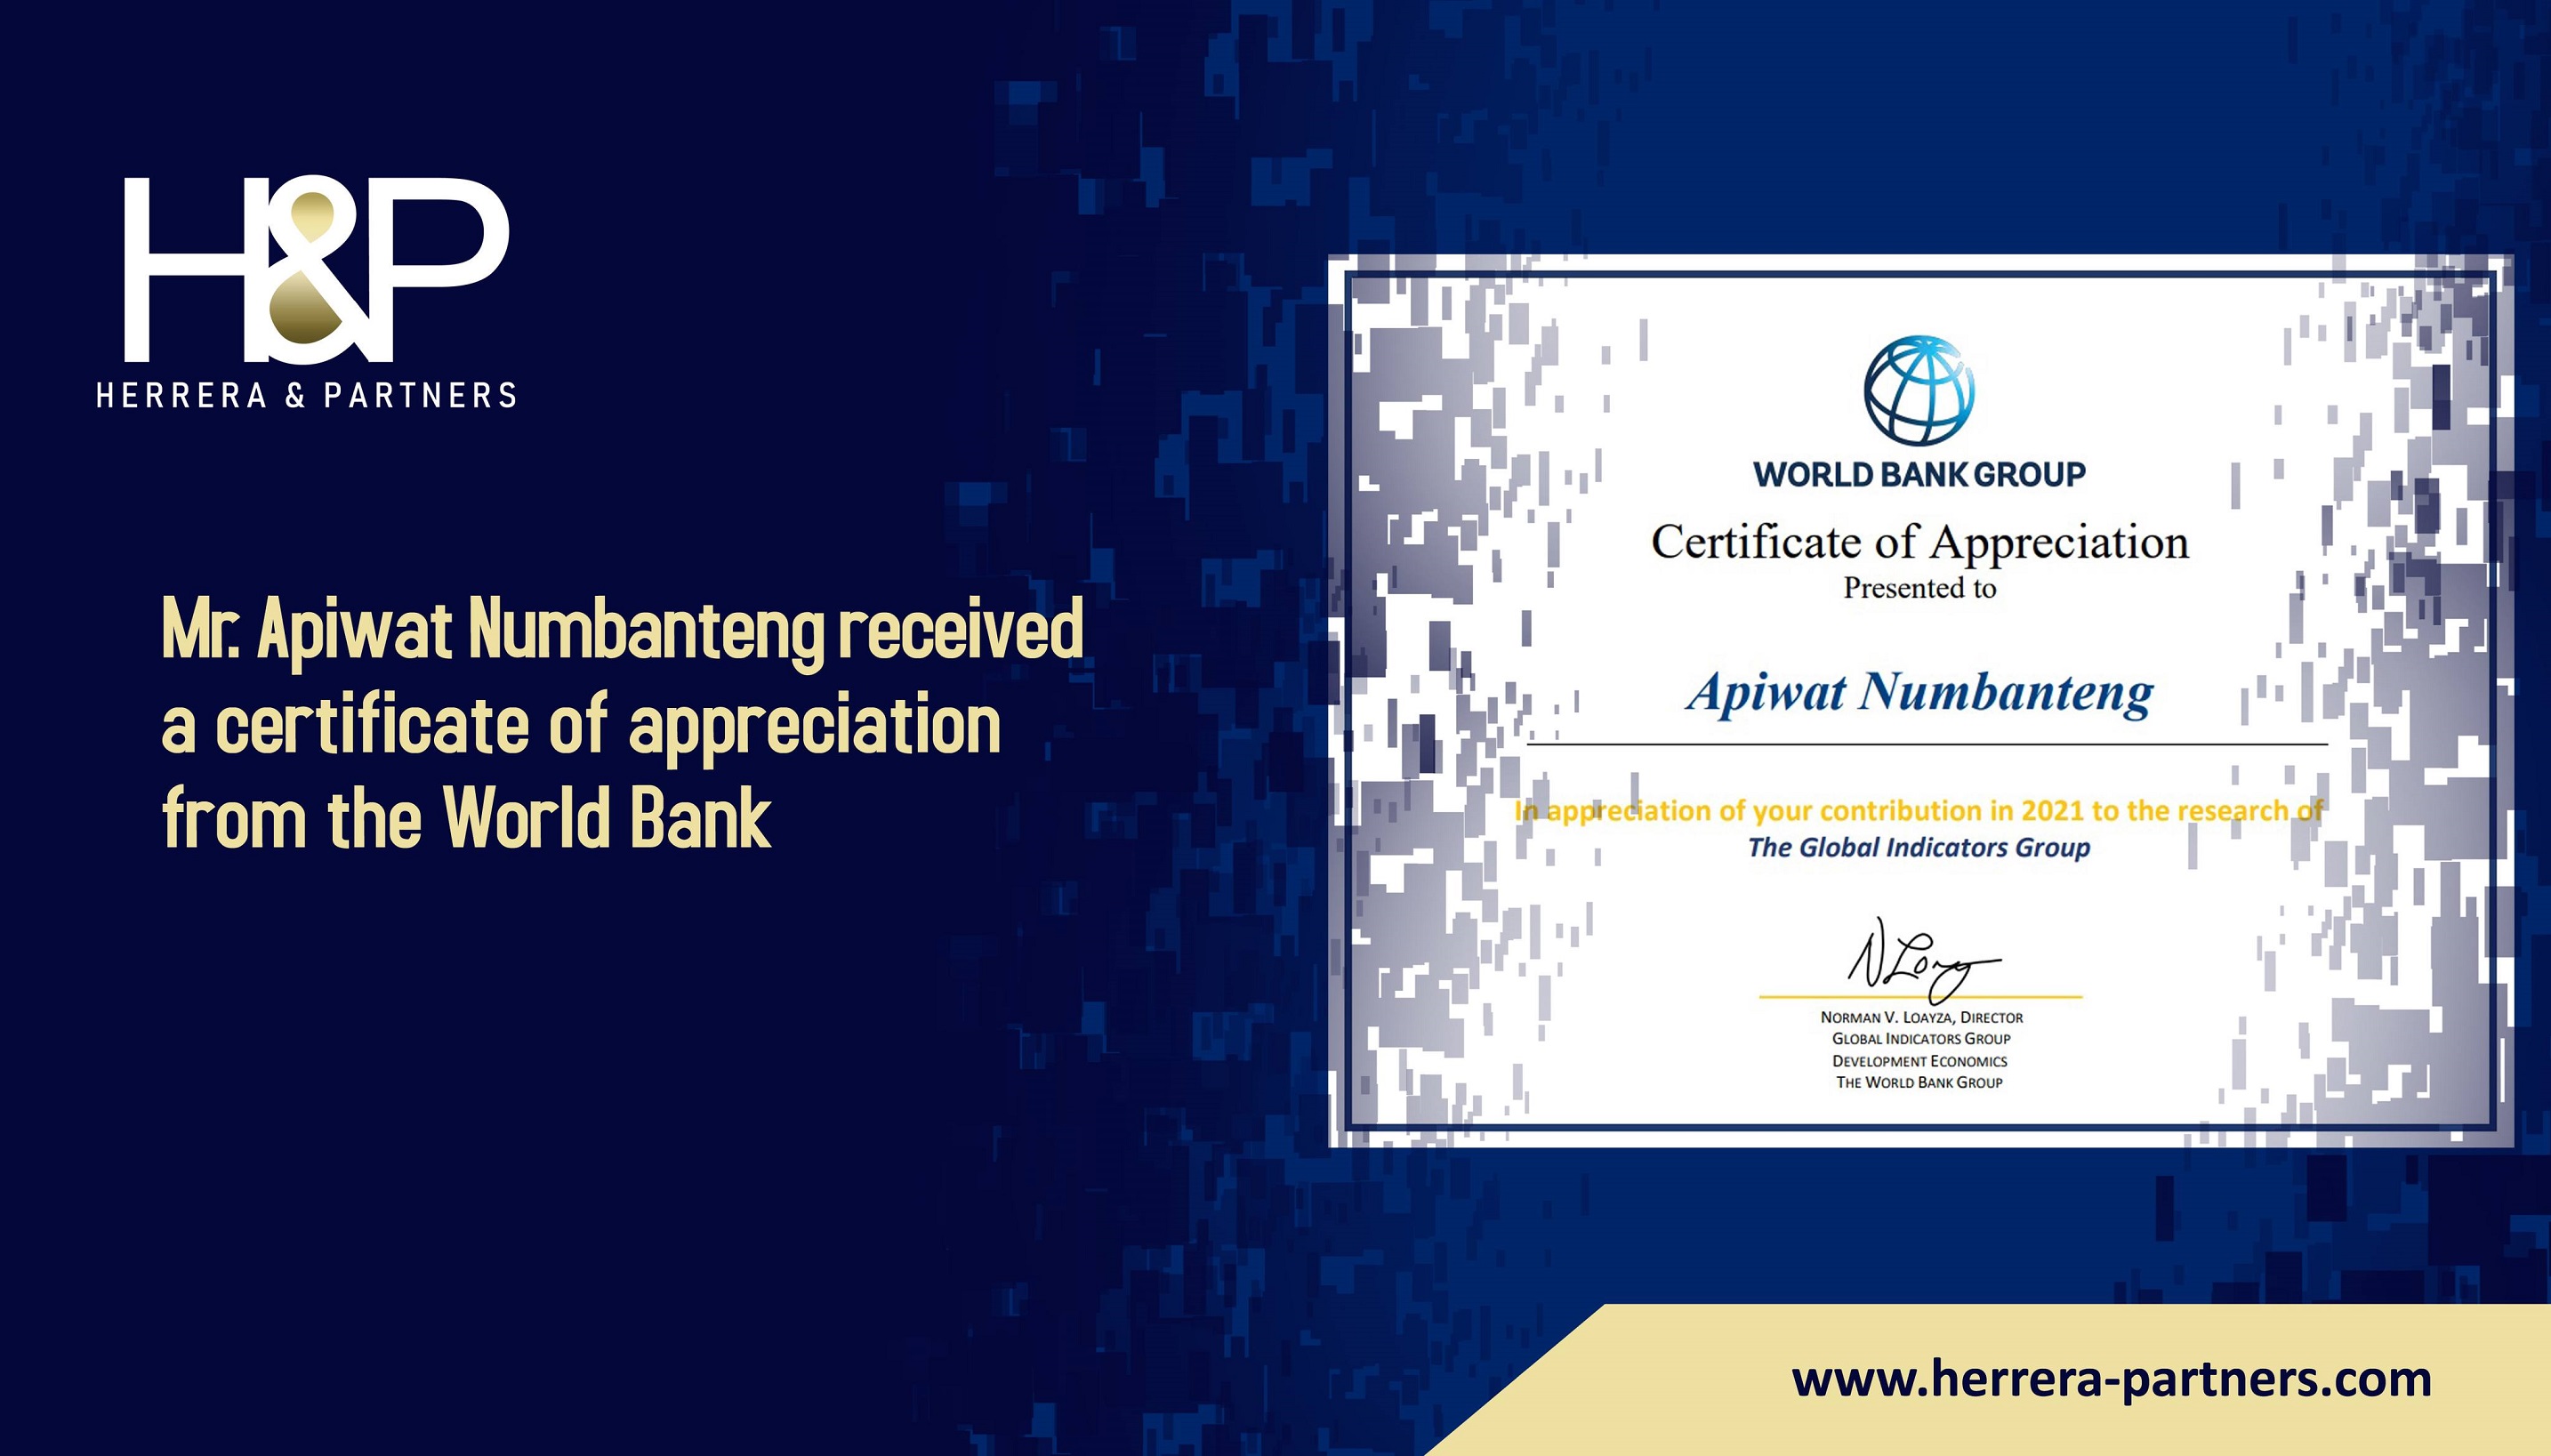 Mr. Apiwat Numbanteng received a certificate of appreciation from the World Bank H&P Corporate law firm in Bangkok